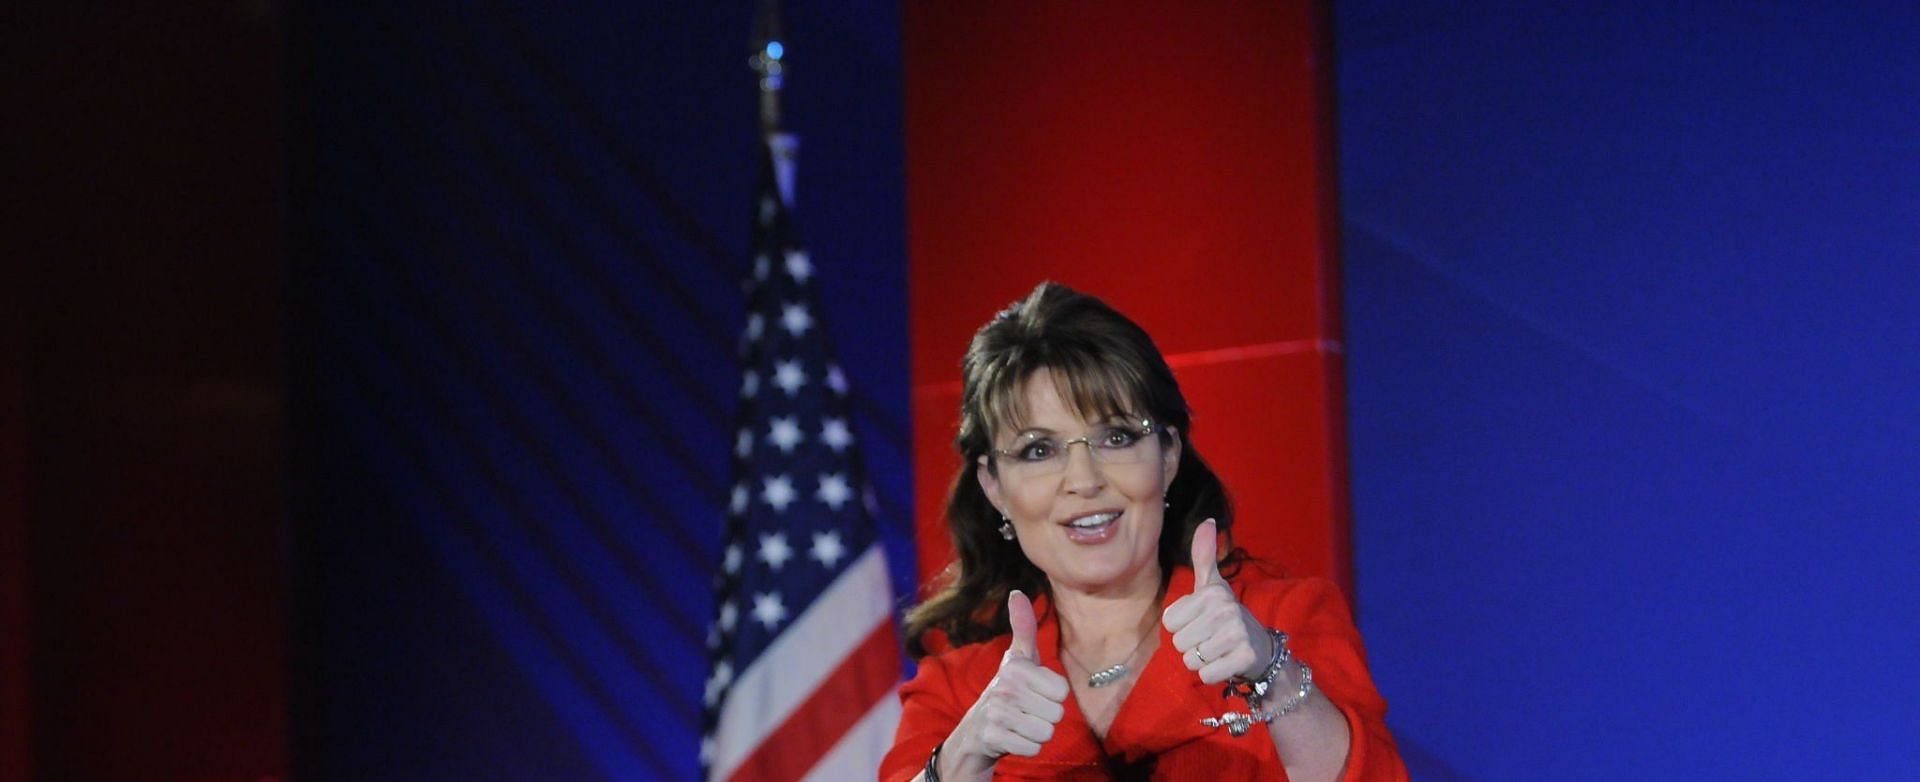 Sarah Palin resigned from her position as the Governor of Alaska in 2009 (Image via Cheryl Gerber/Getty Images)